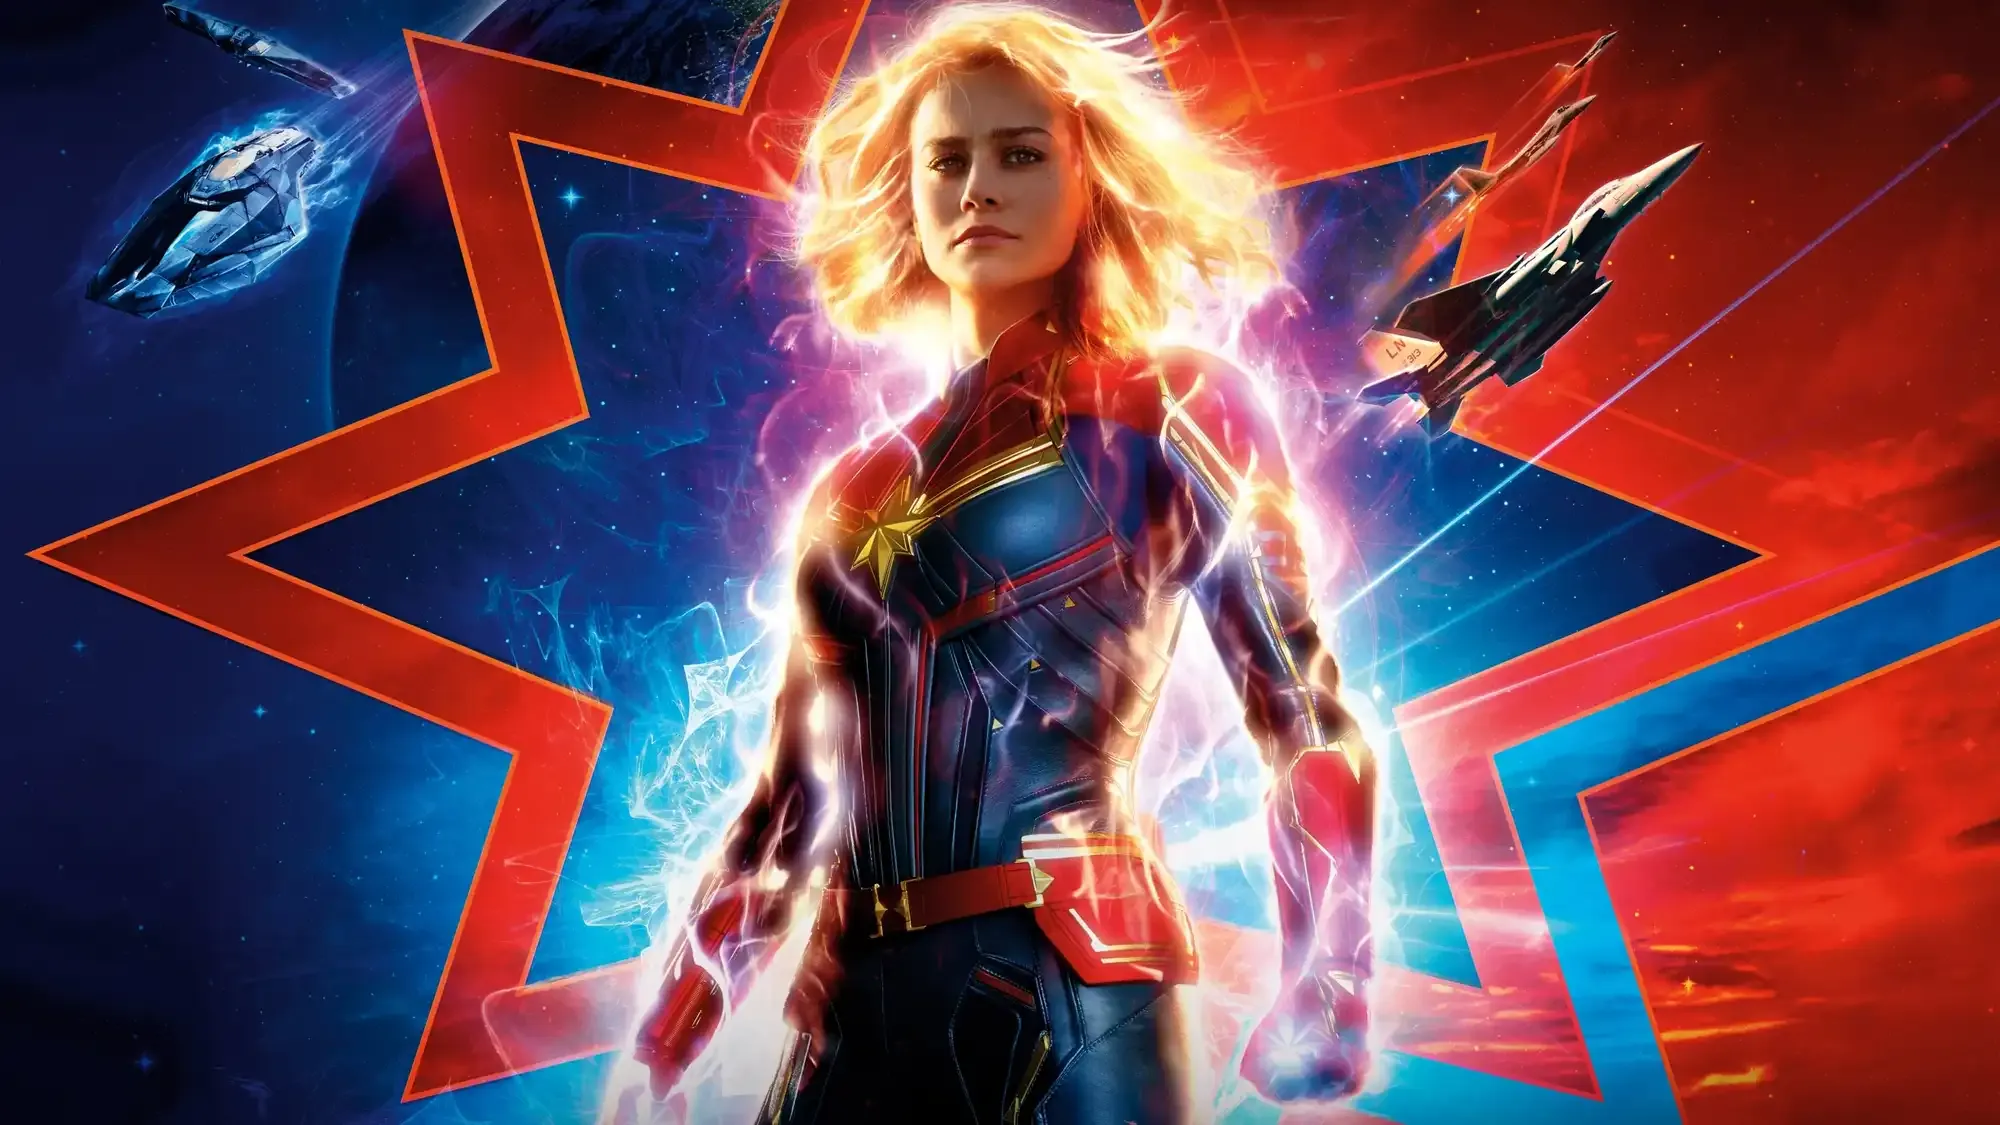 Captain Marvel movie review